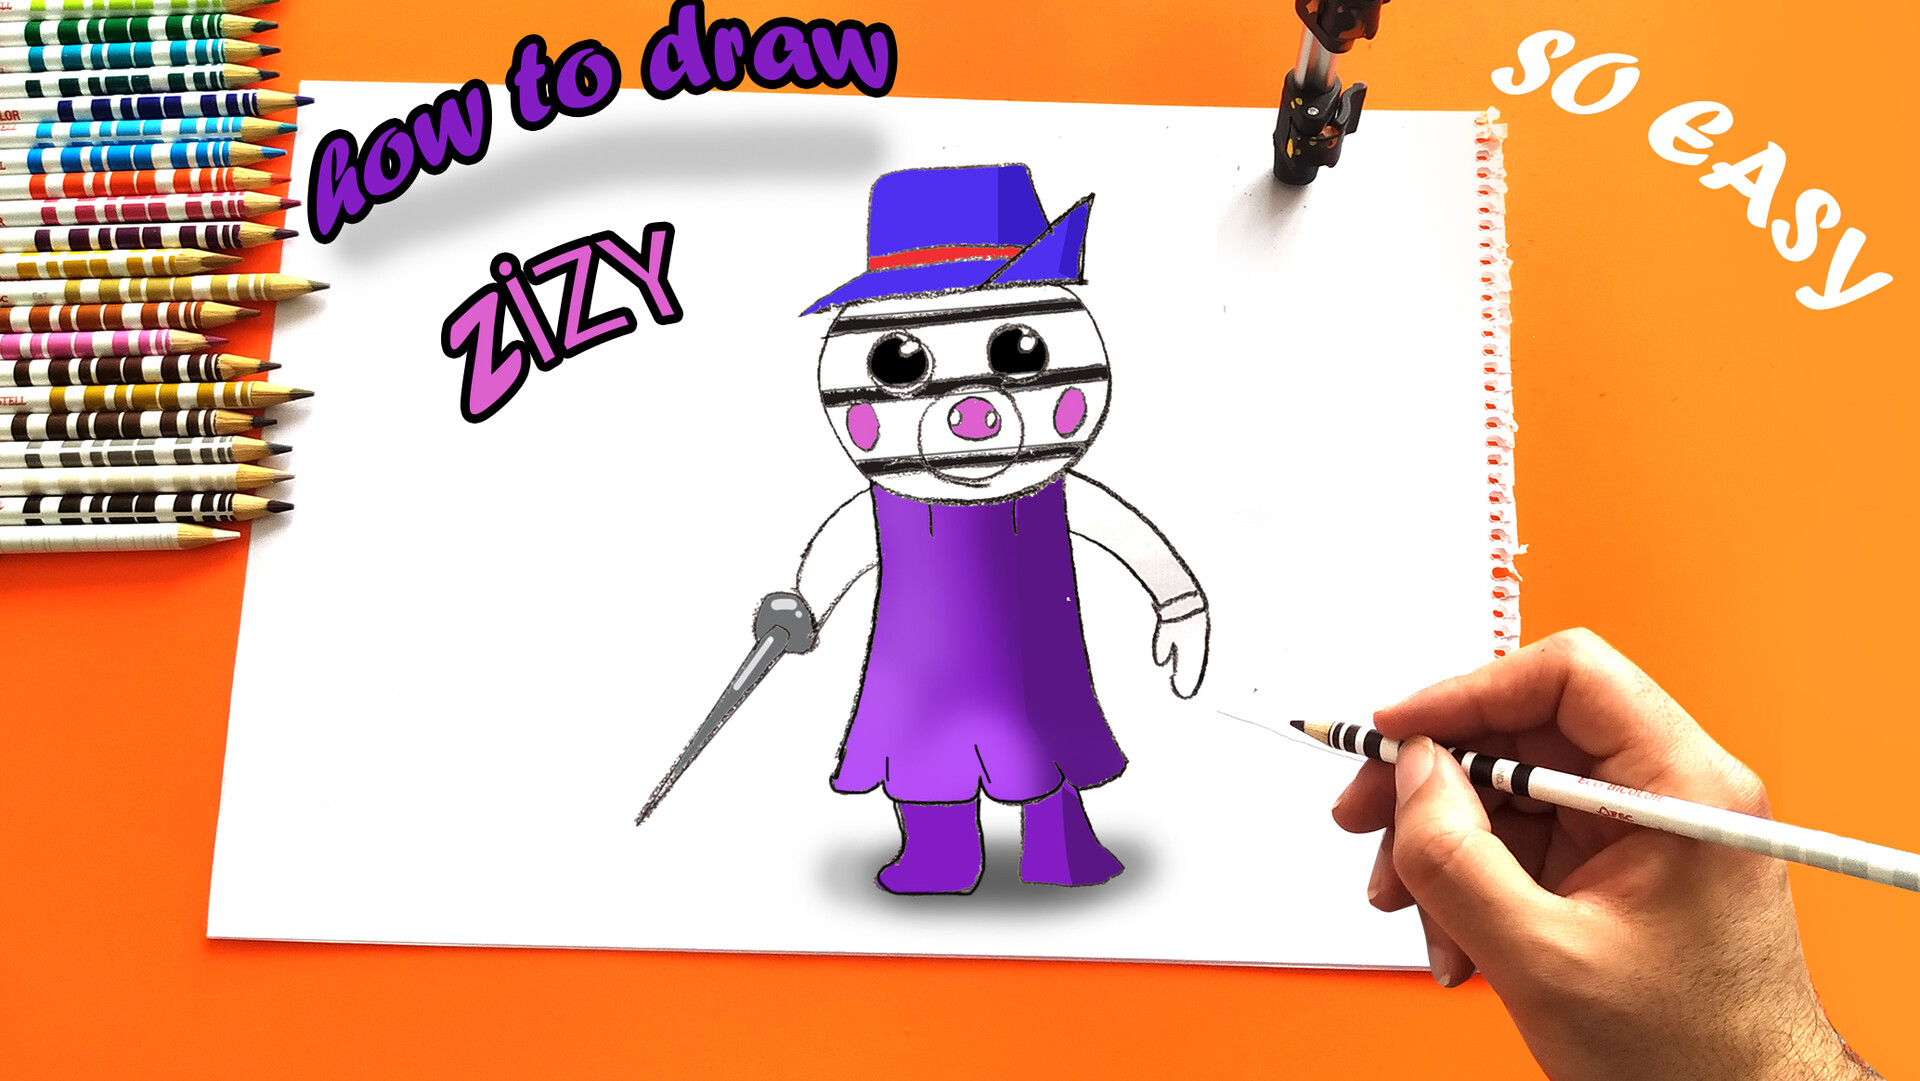 How to Draw the Roblox Piggy - Really Easy Drawing Tutorial